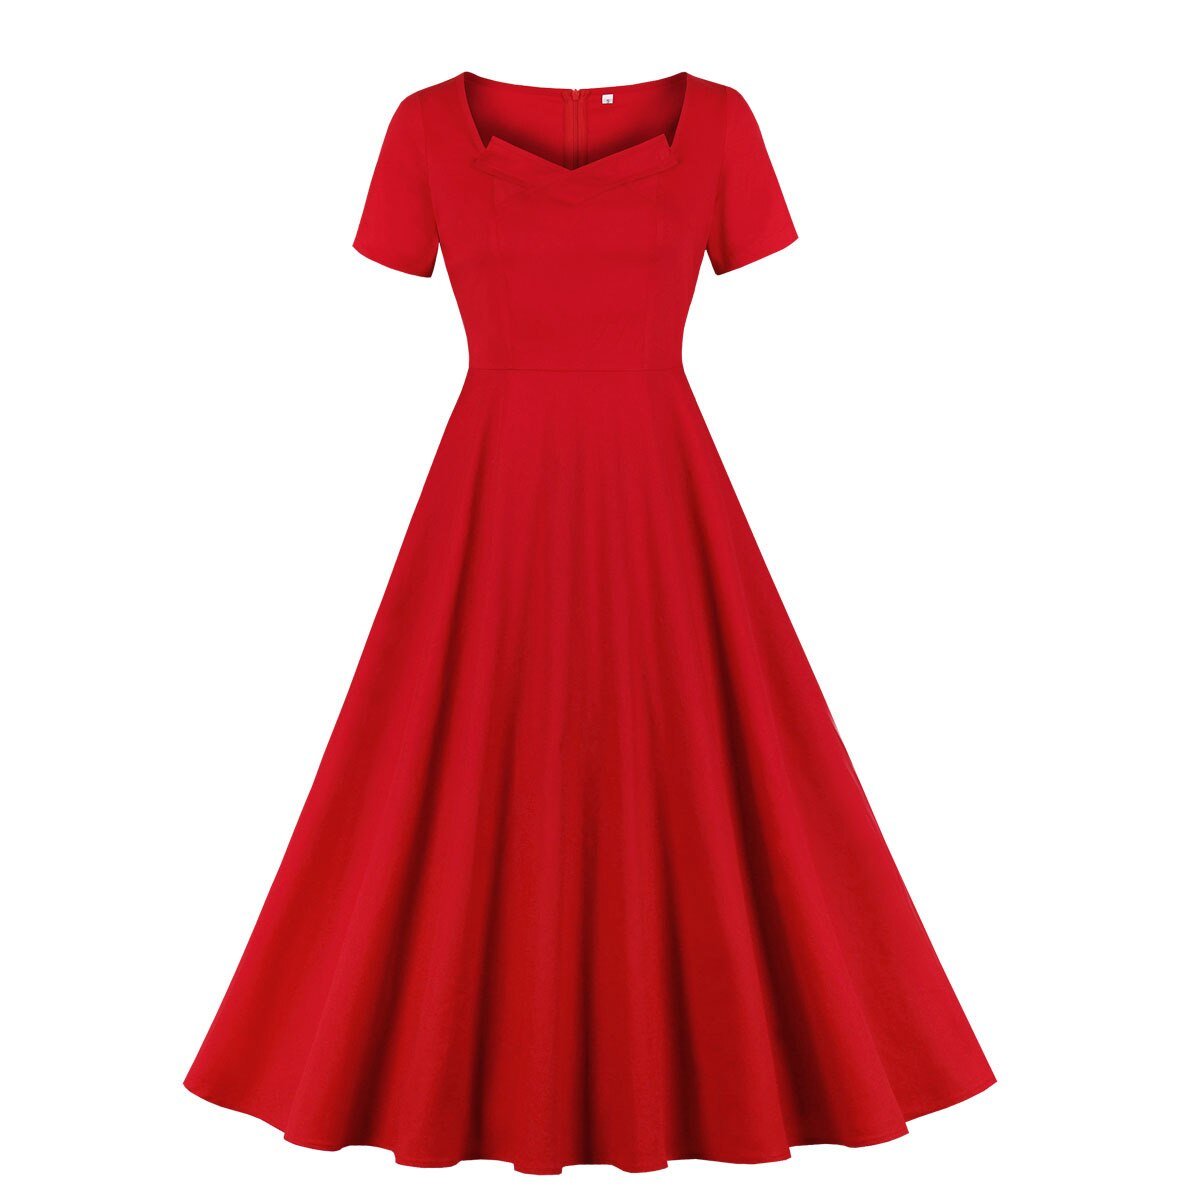 Red Women Retro Vintage Tunic Midi Summer Dress 50s 60s Solid Color Big Swing A Line Cotton Rockabiily Swing Sundress For Party